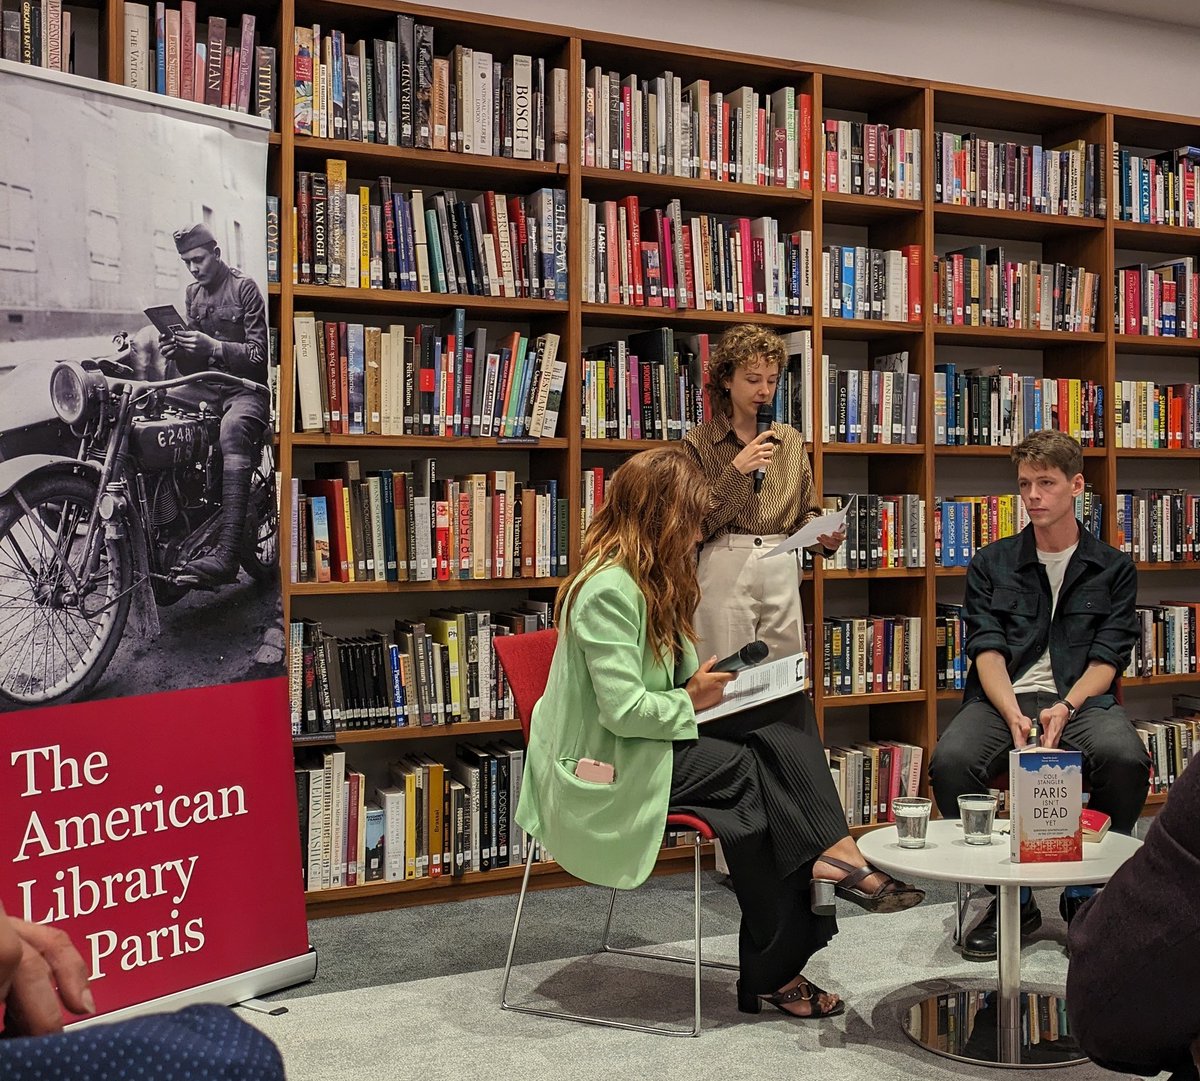 Great to hear @ColeStangler present his new book #ParisIsNotDead at the @amerlibparis this evening. Lively discussion about gentrification and housing policy in the City of Light.